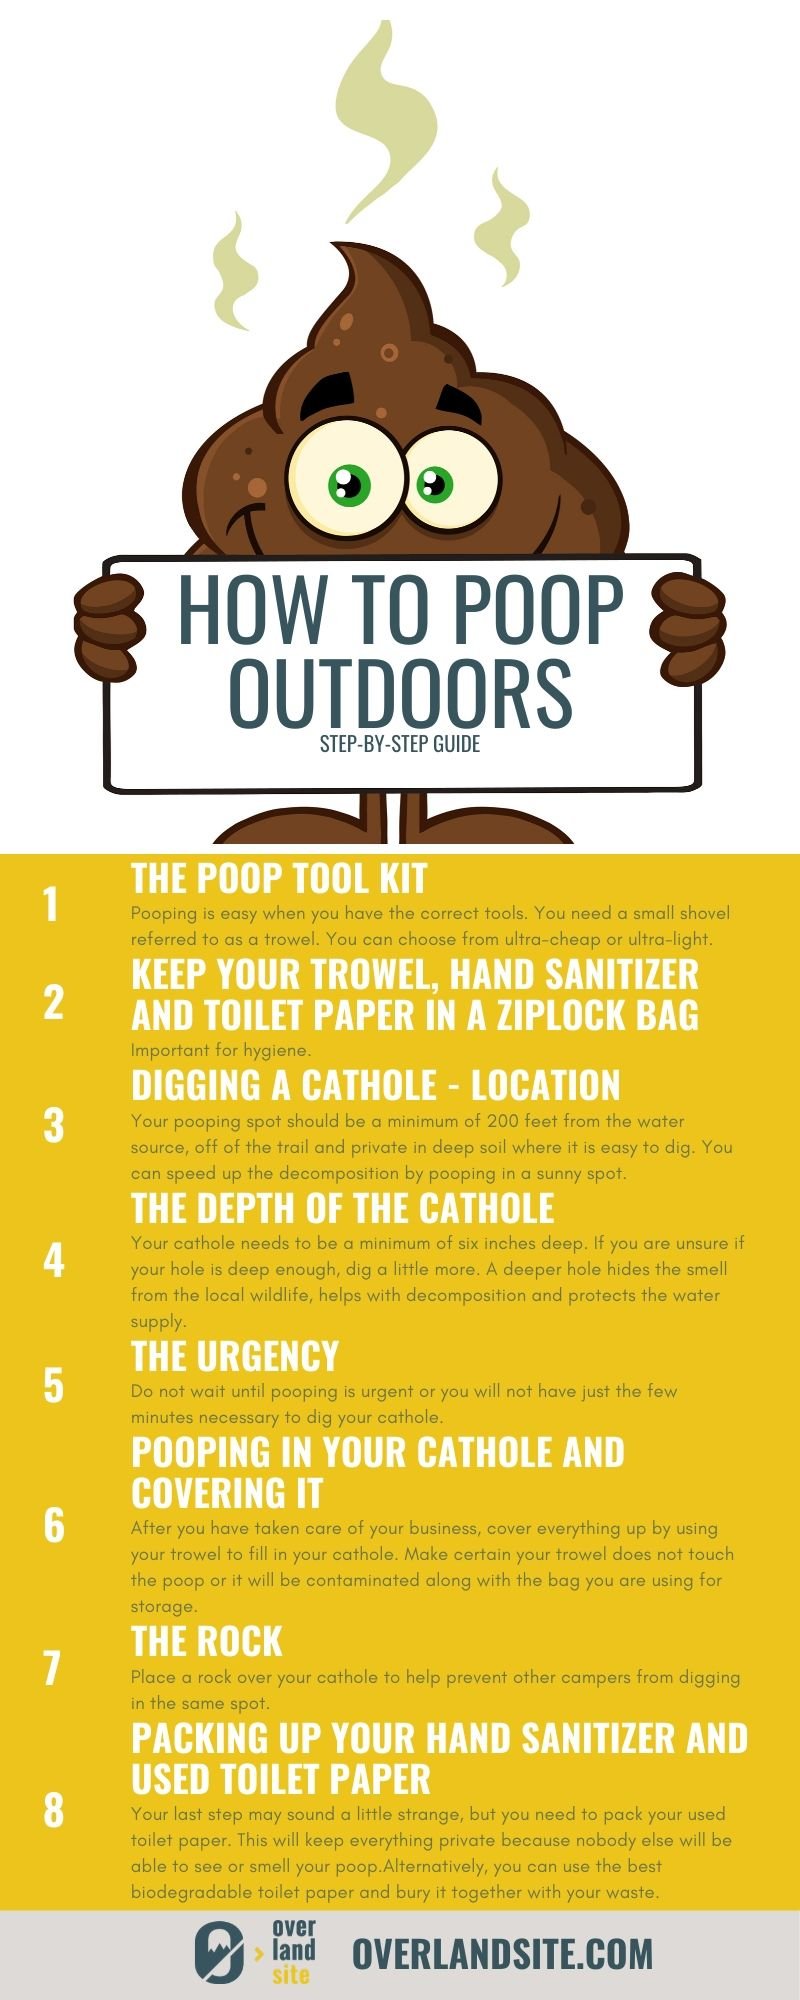 Step by step guide on how to poop outdoors or while camping